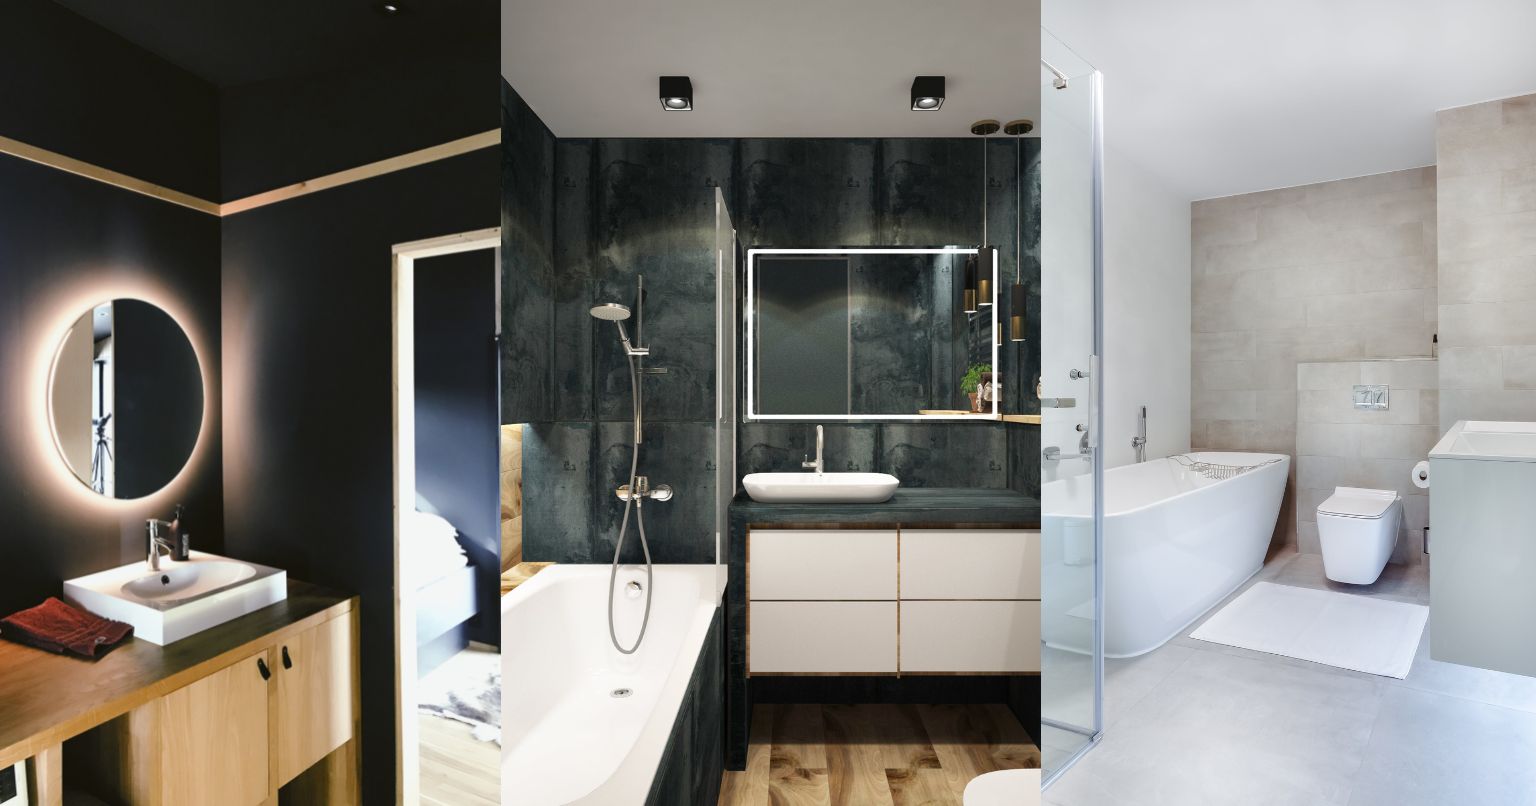 You are currently viewing 20+ New Indian Bathroom Design Ideas On A Budget